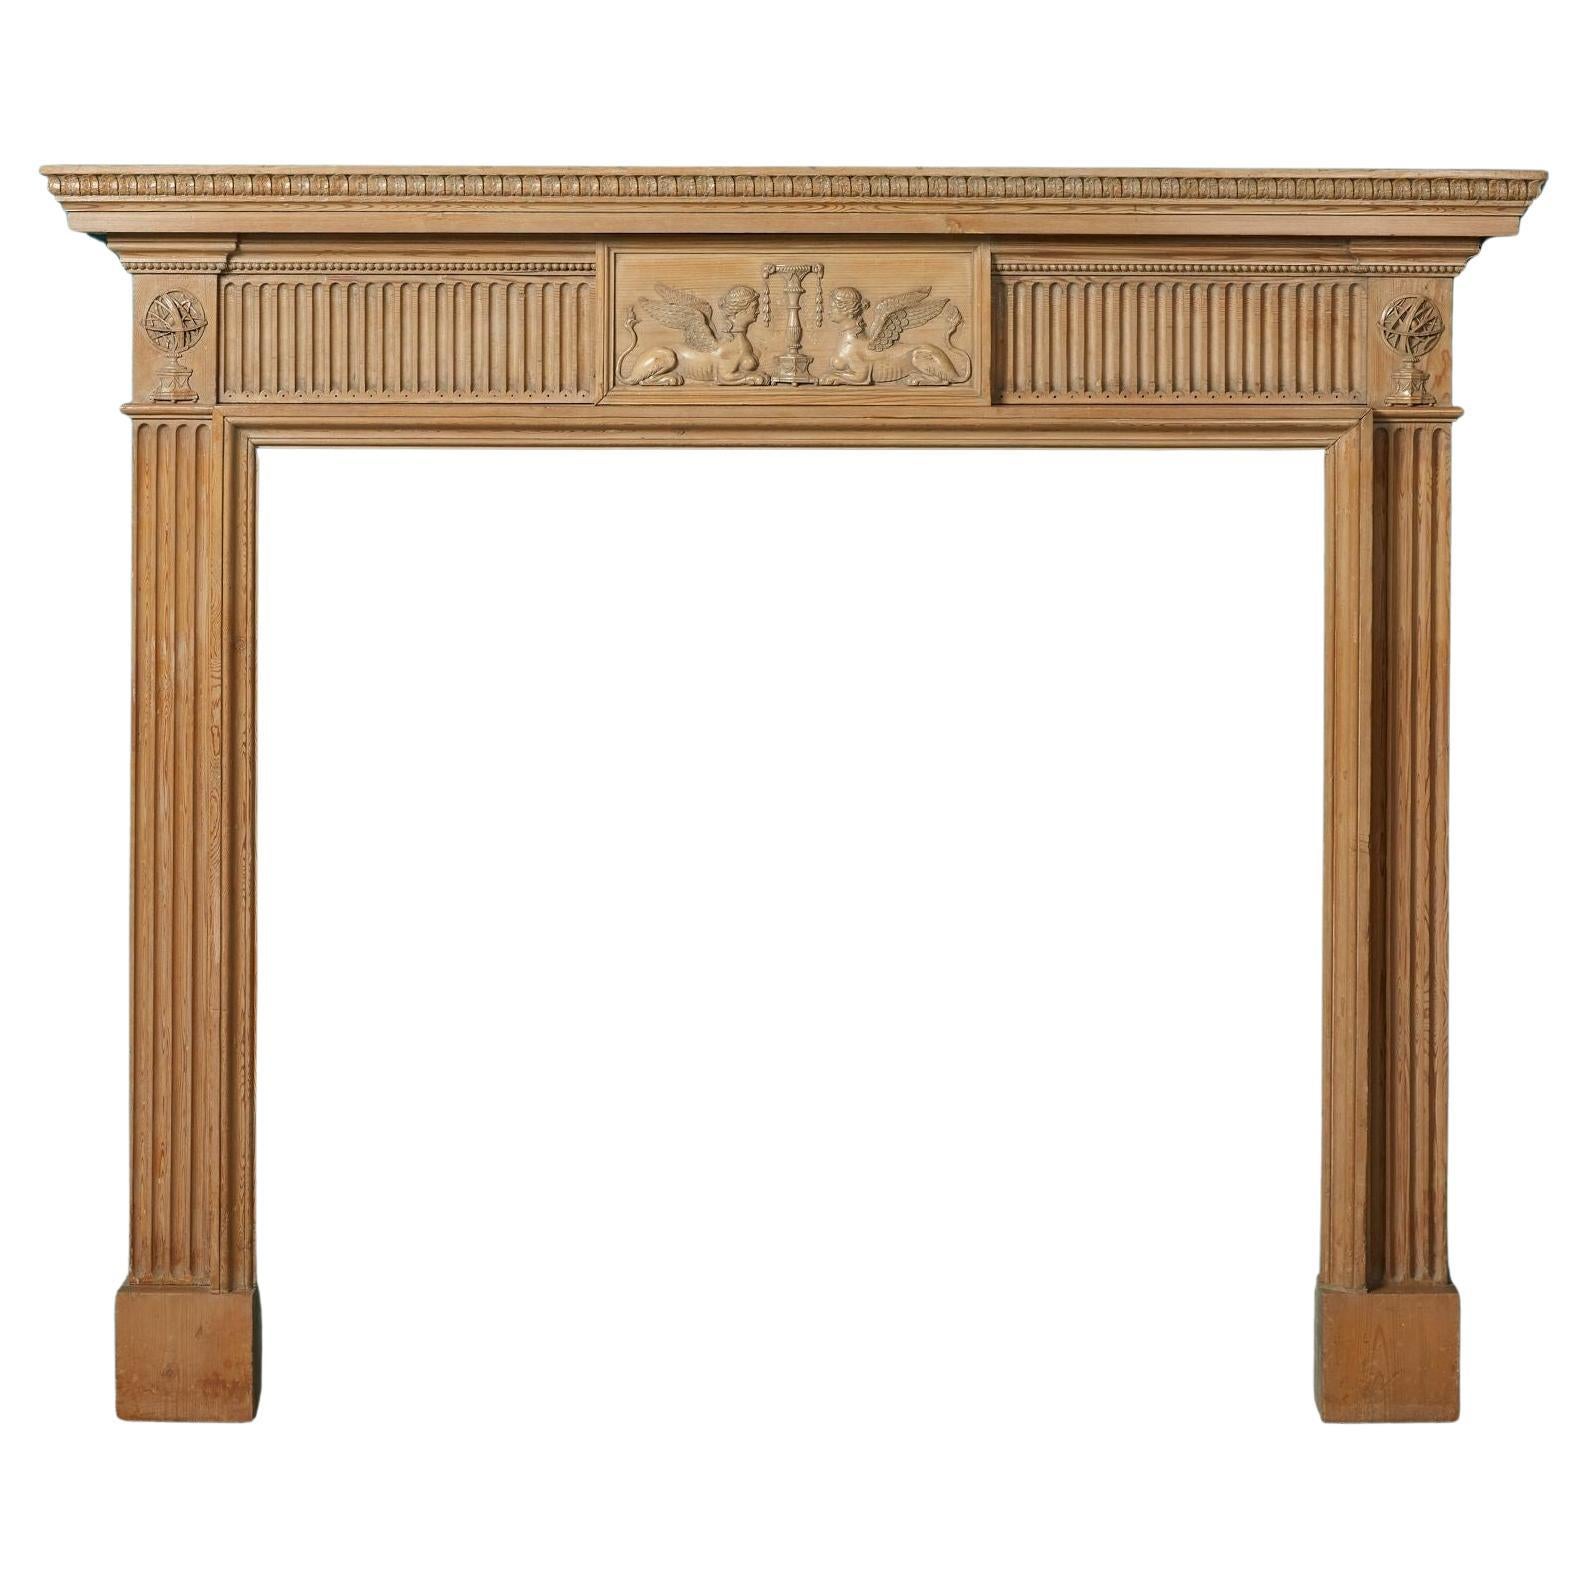 Antique English Neoclassical Style Fire Mantel For Sale